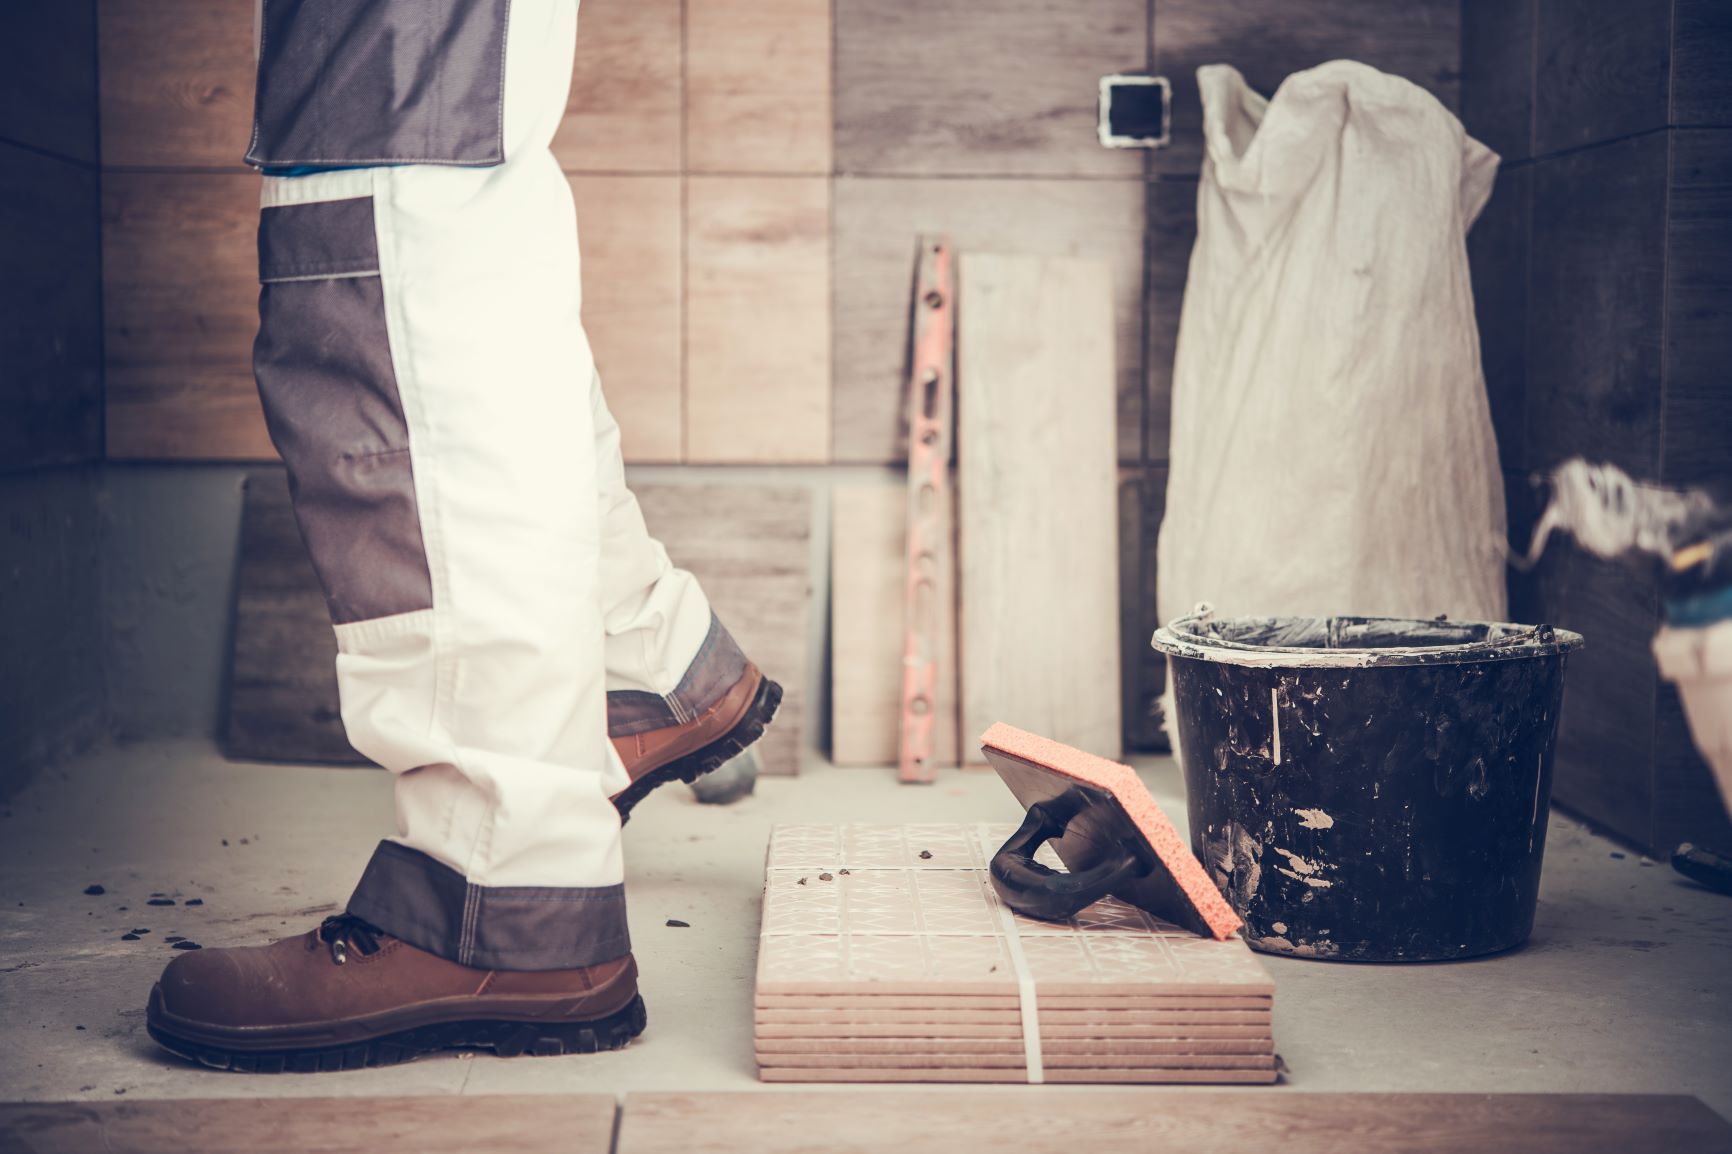 Refinishing, What You Should Know Before Remodeling